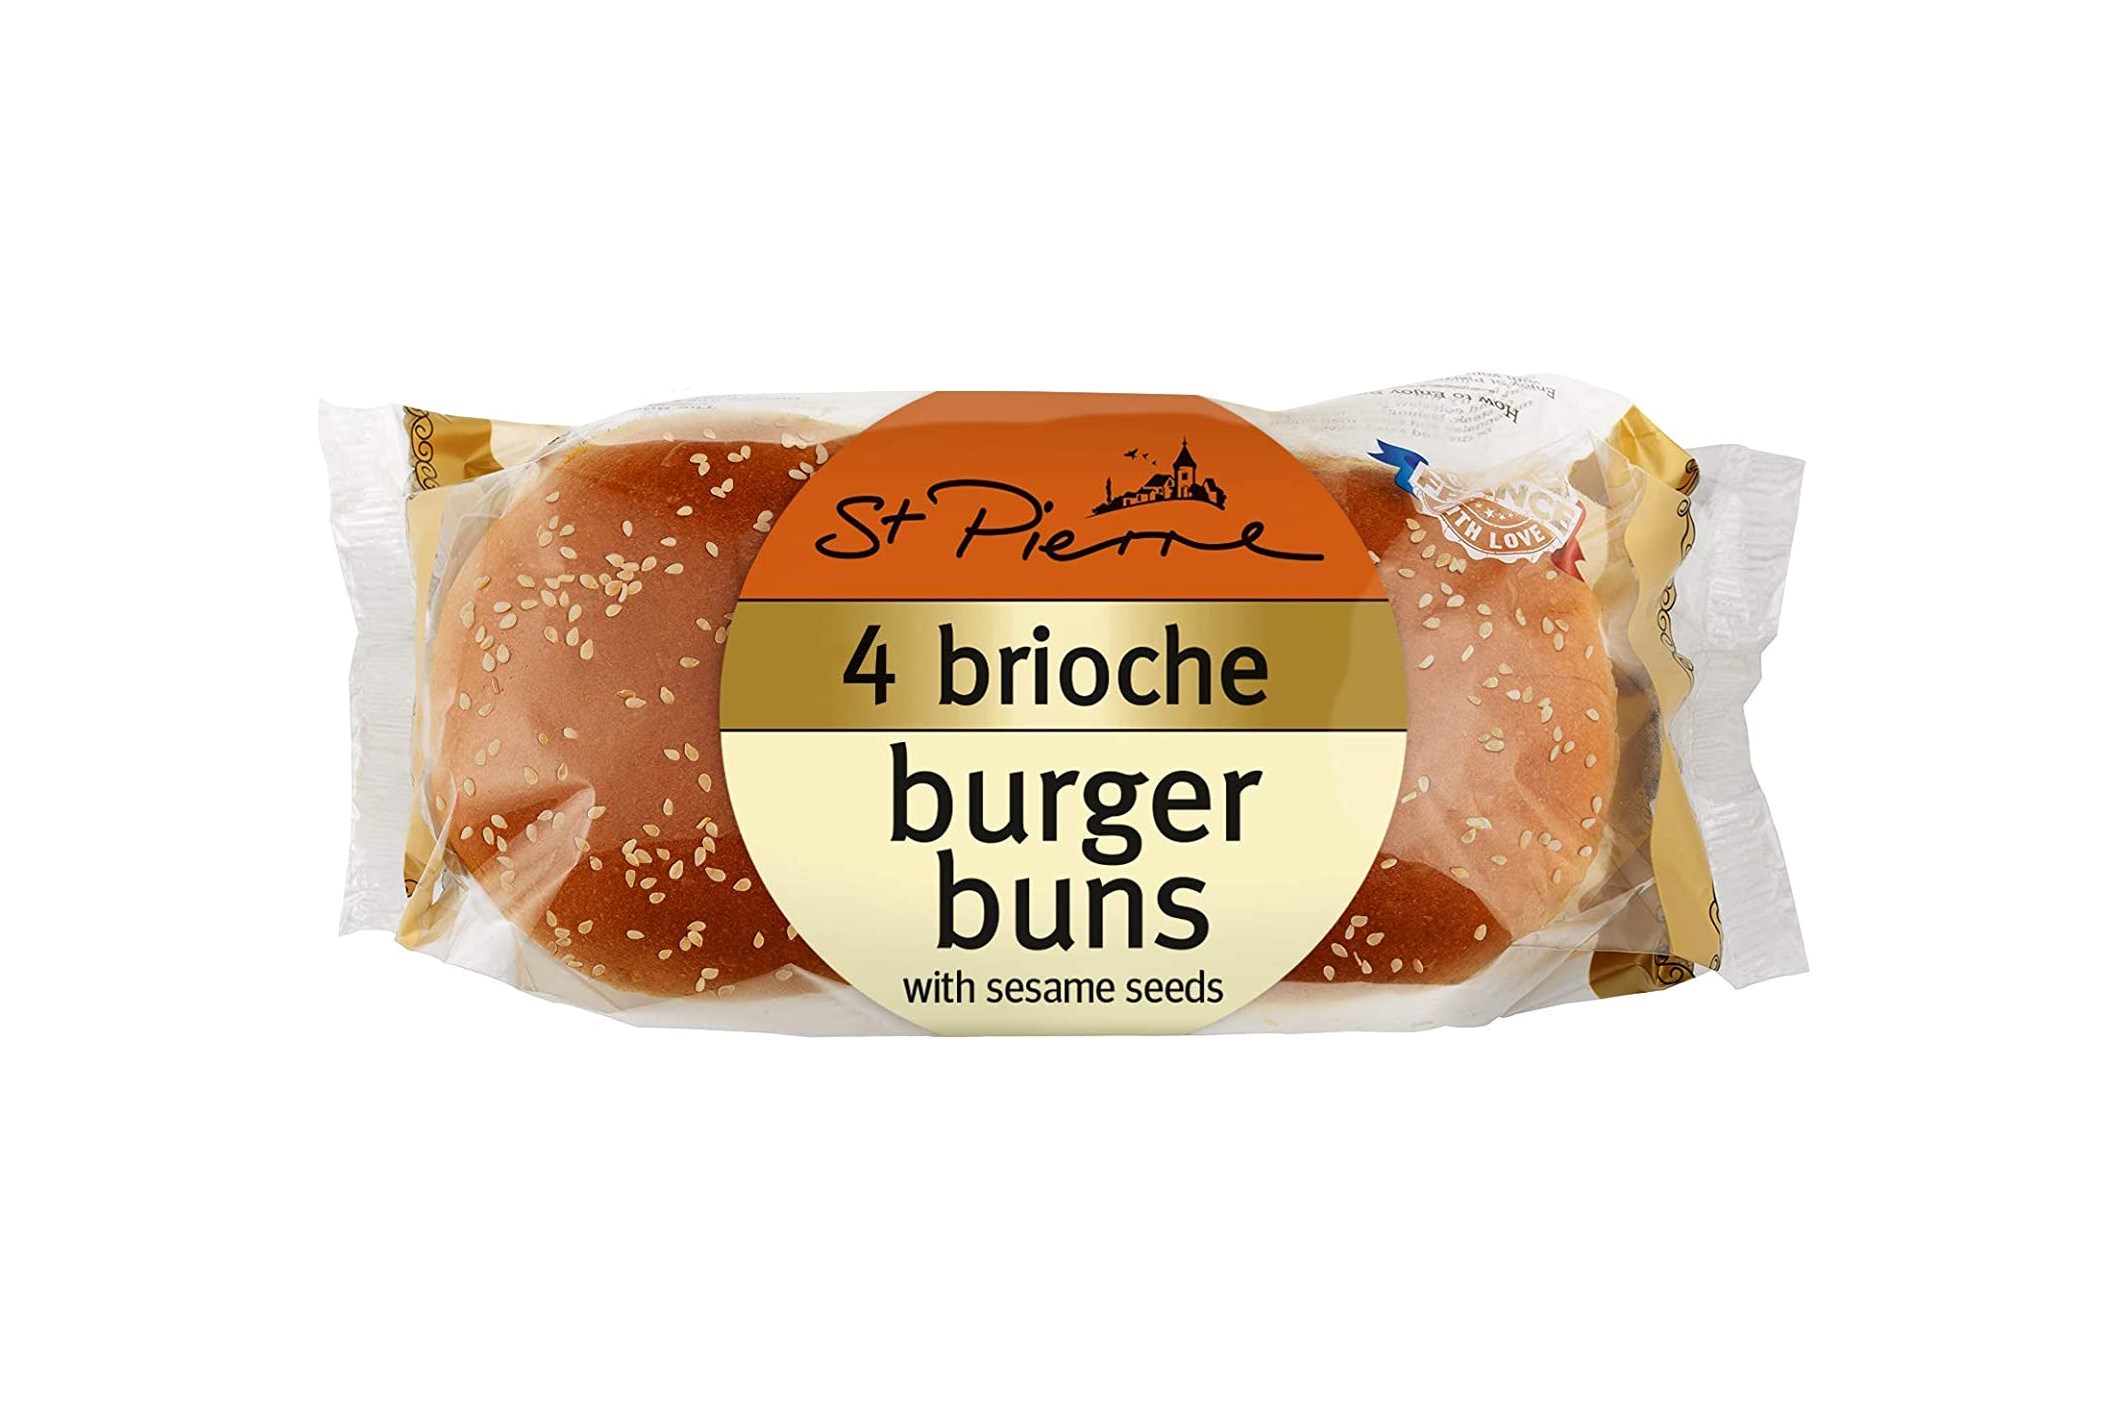 St Pierre Brioche Burger Buns with Sesame Seeds - Pack of 4